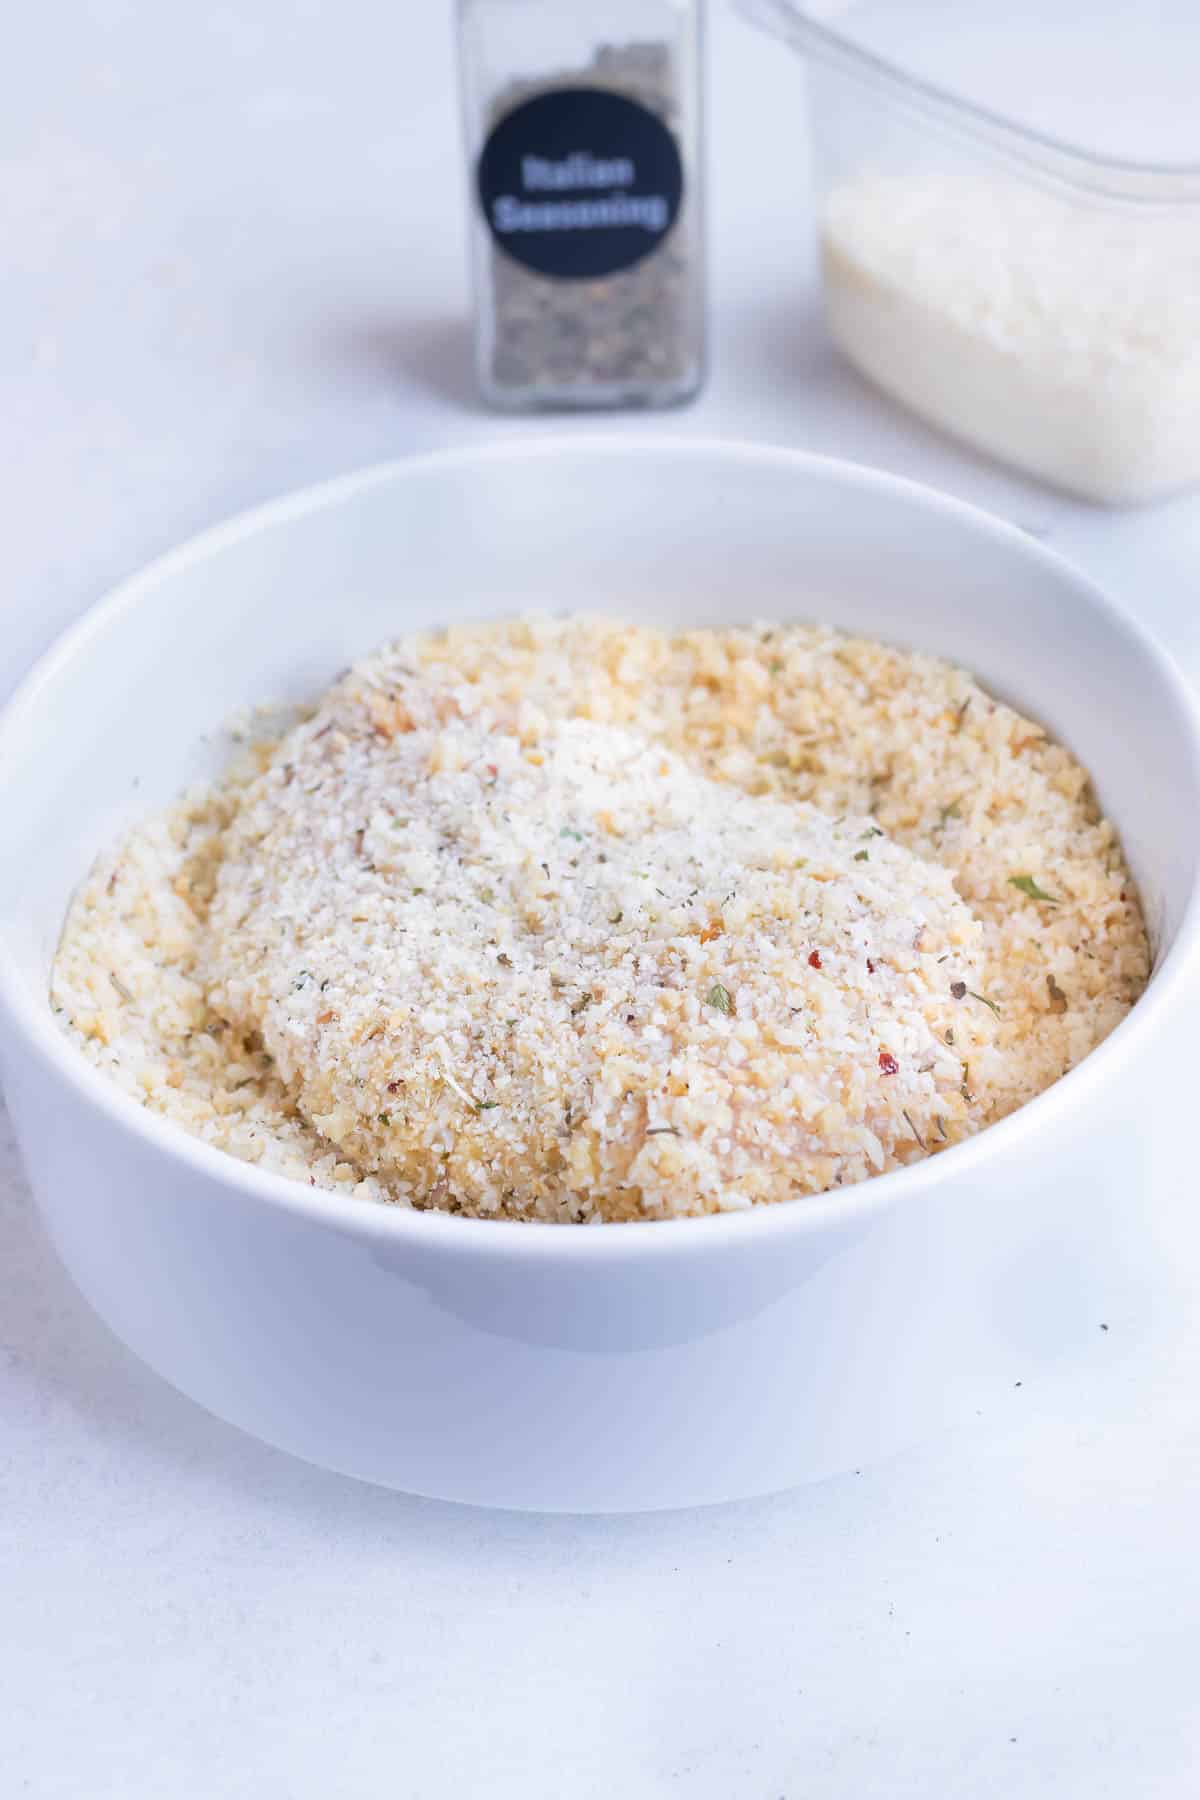 Chicken parmesan recipe has chicken crusted in a gluten-free breadcrumb and parmesan mixture.